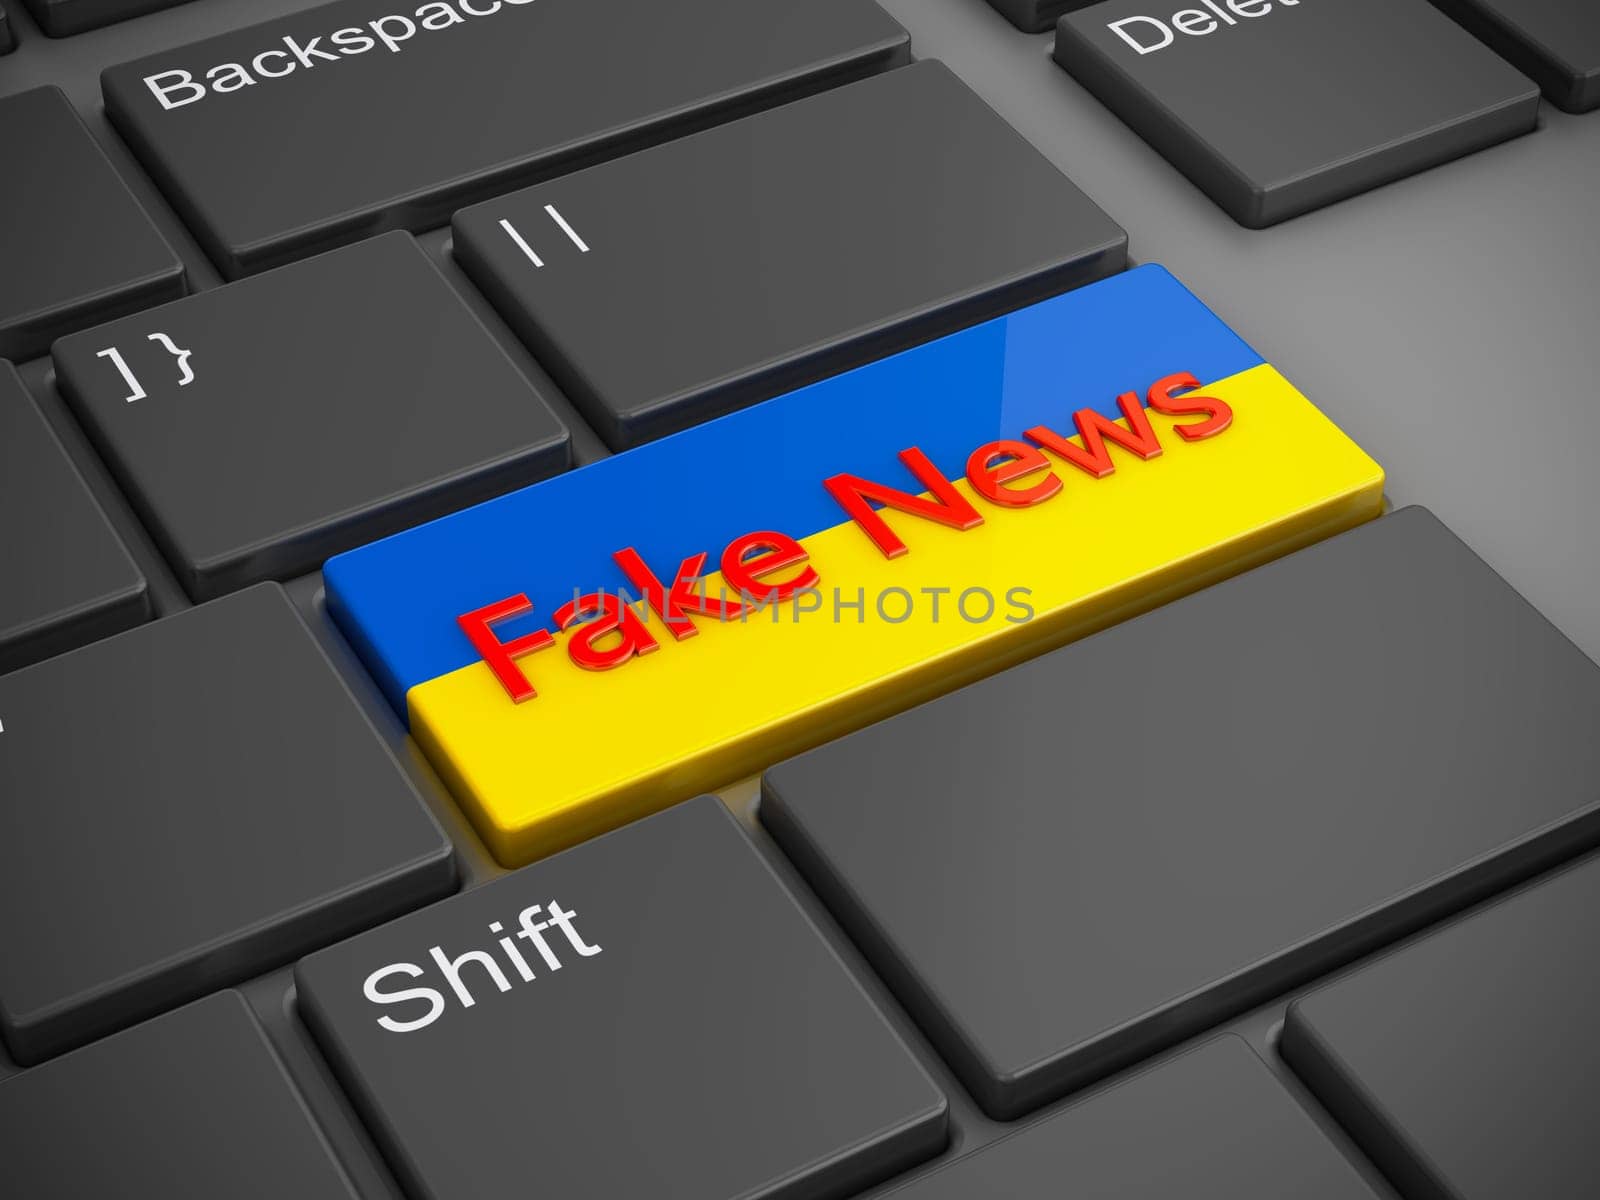  Keyboard with the Ukrainian Fake News.  by rommma